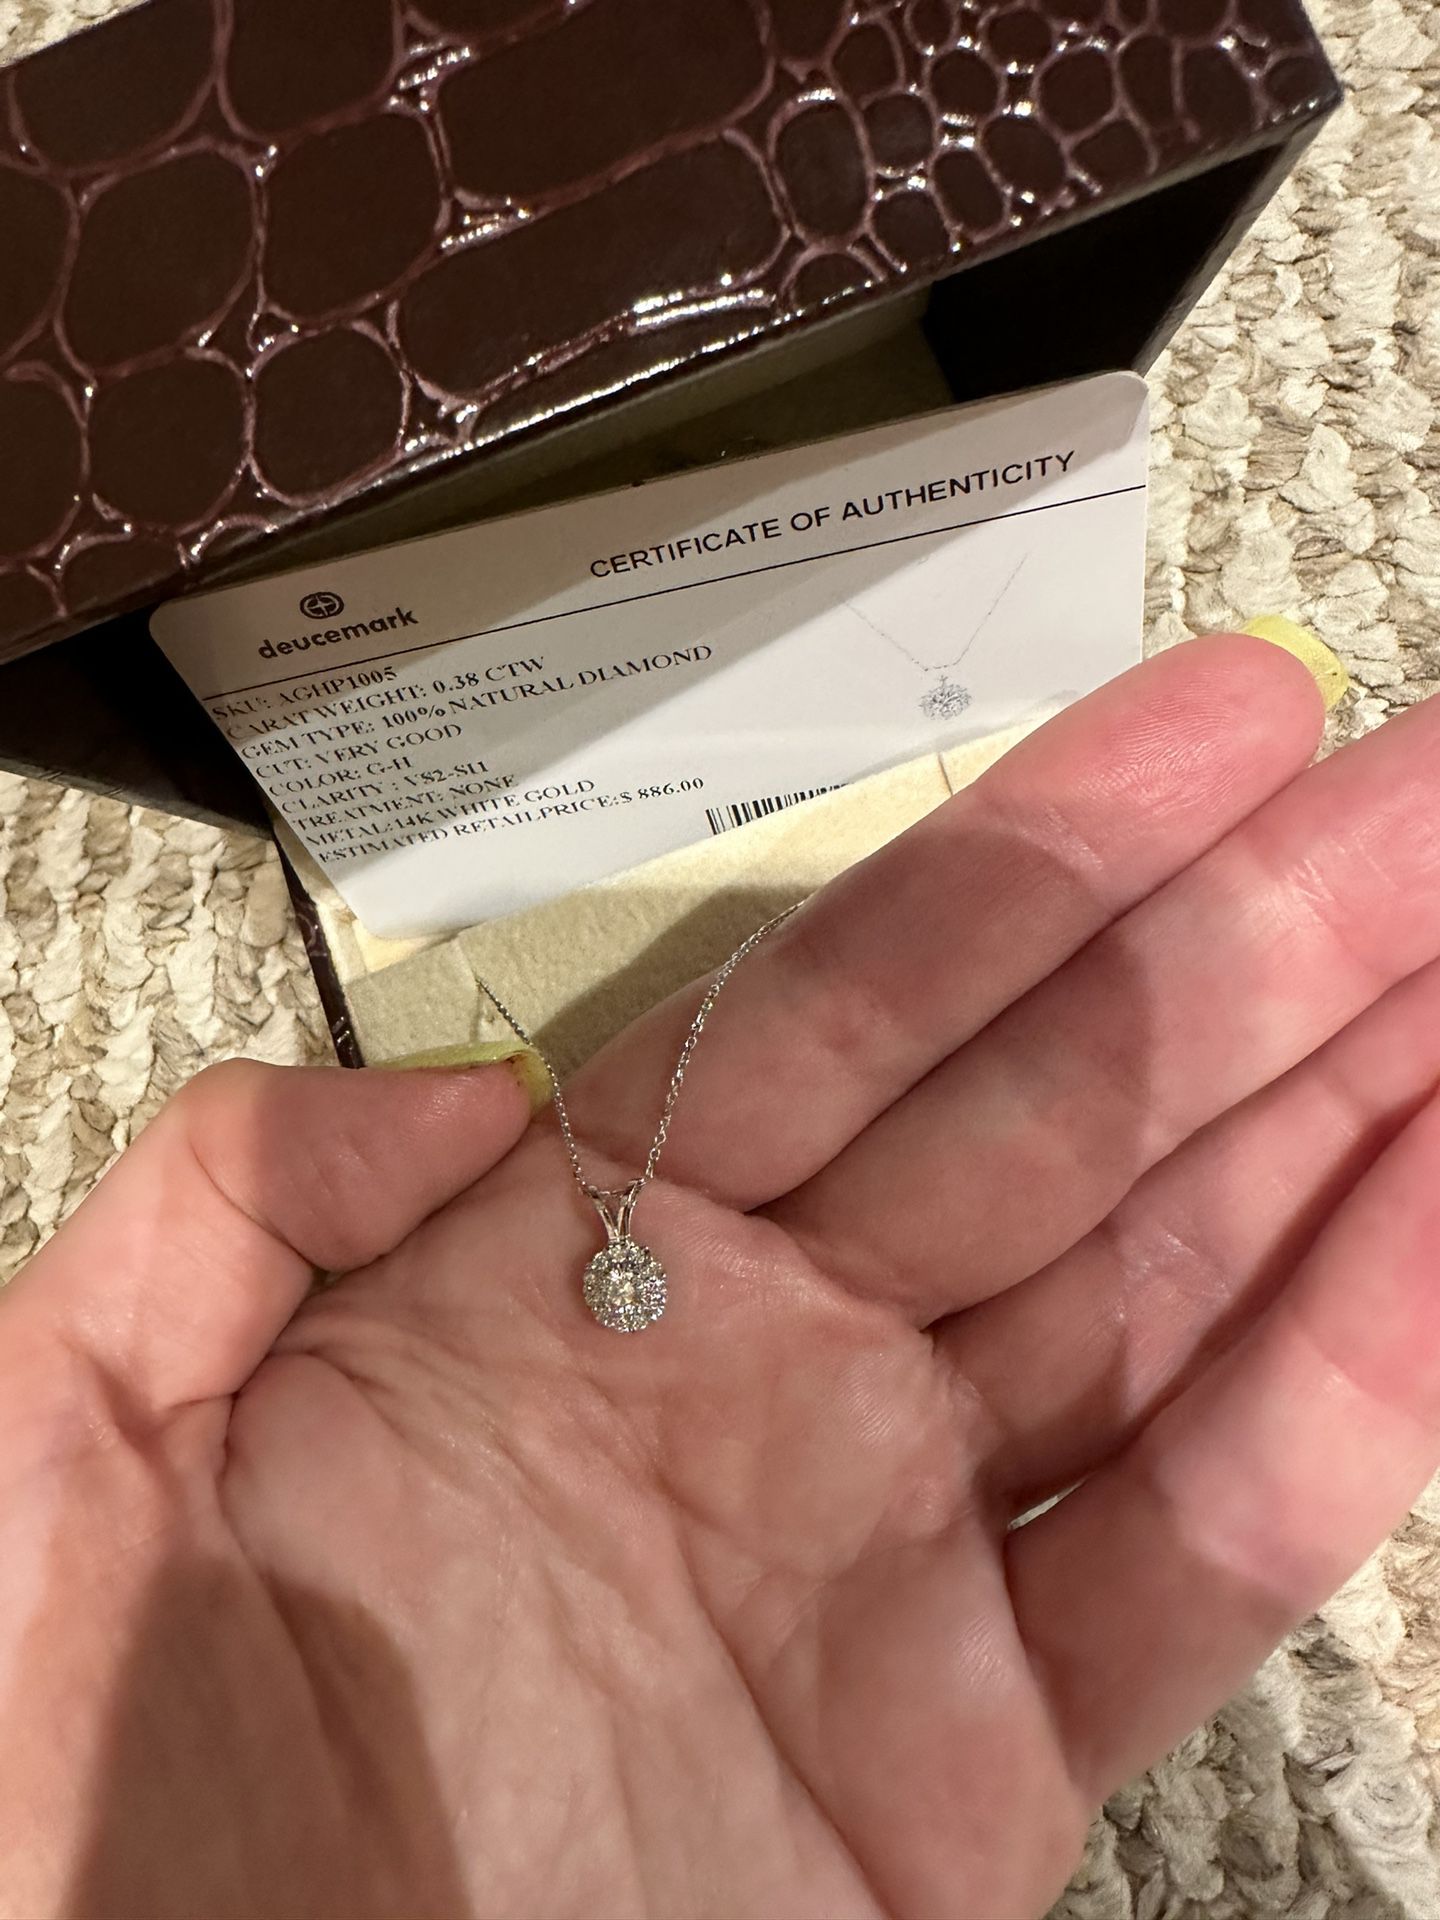 Beautiful Diamond Necklace for Sale in Laud By Sea, FL - OfferUp